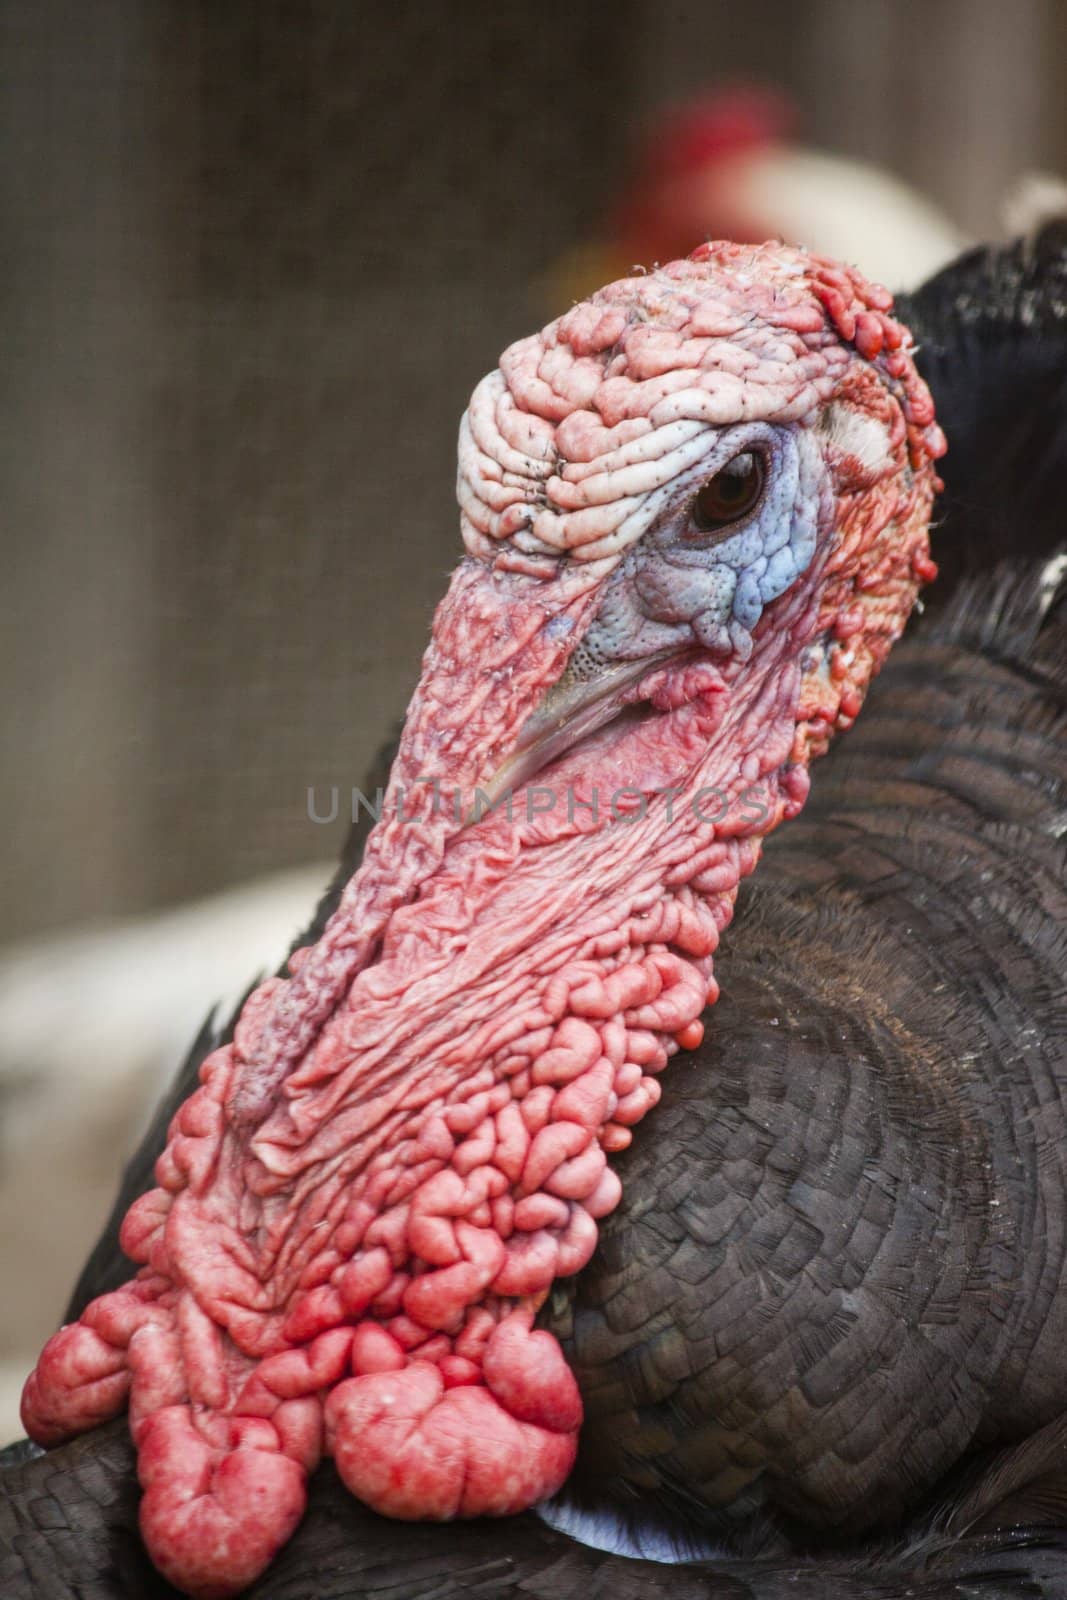 Close up view of the head of turkey.